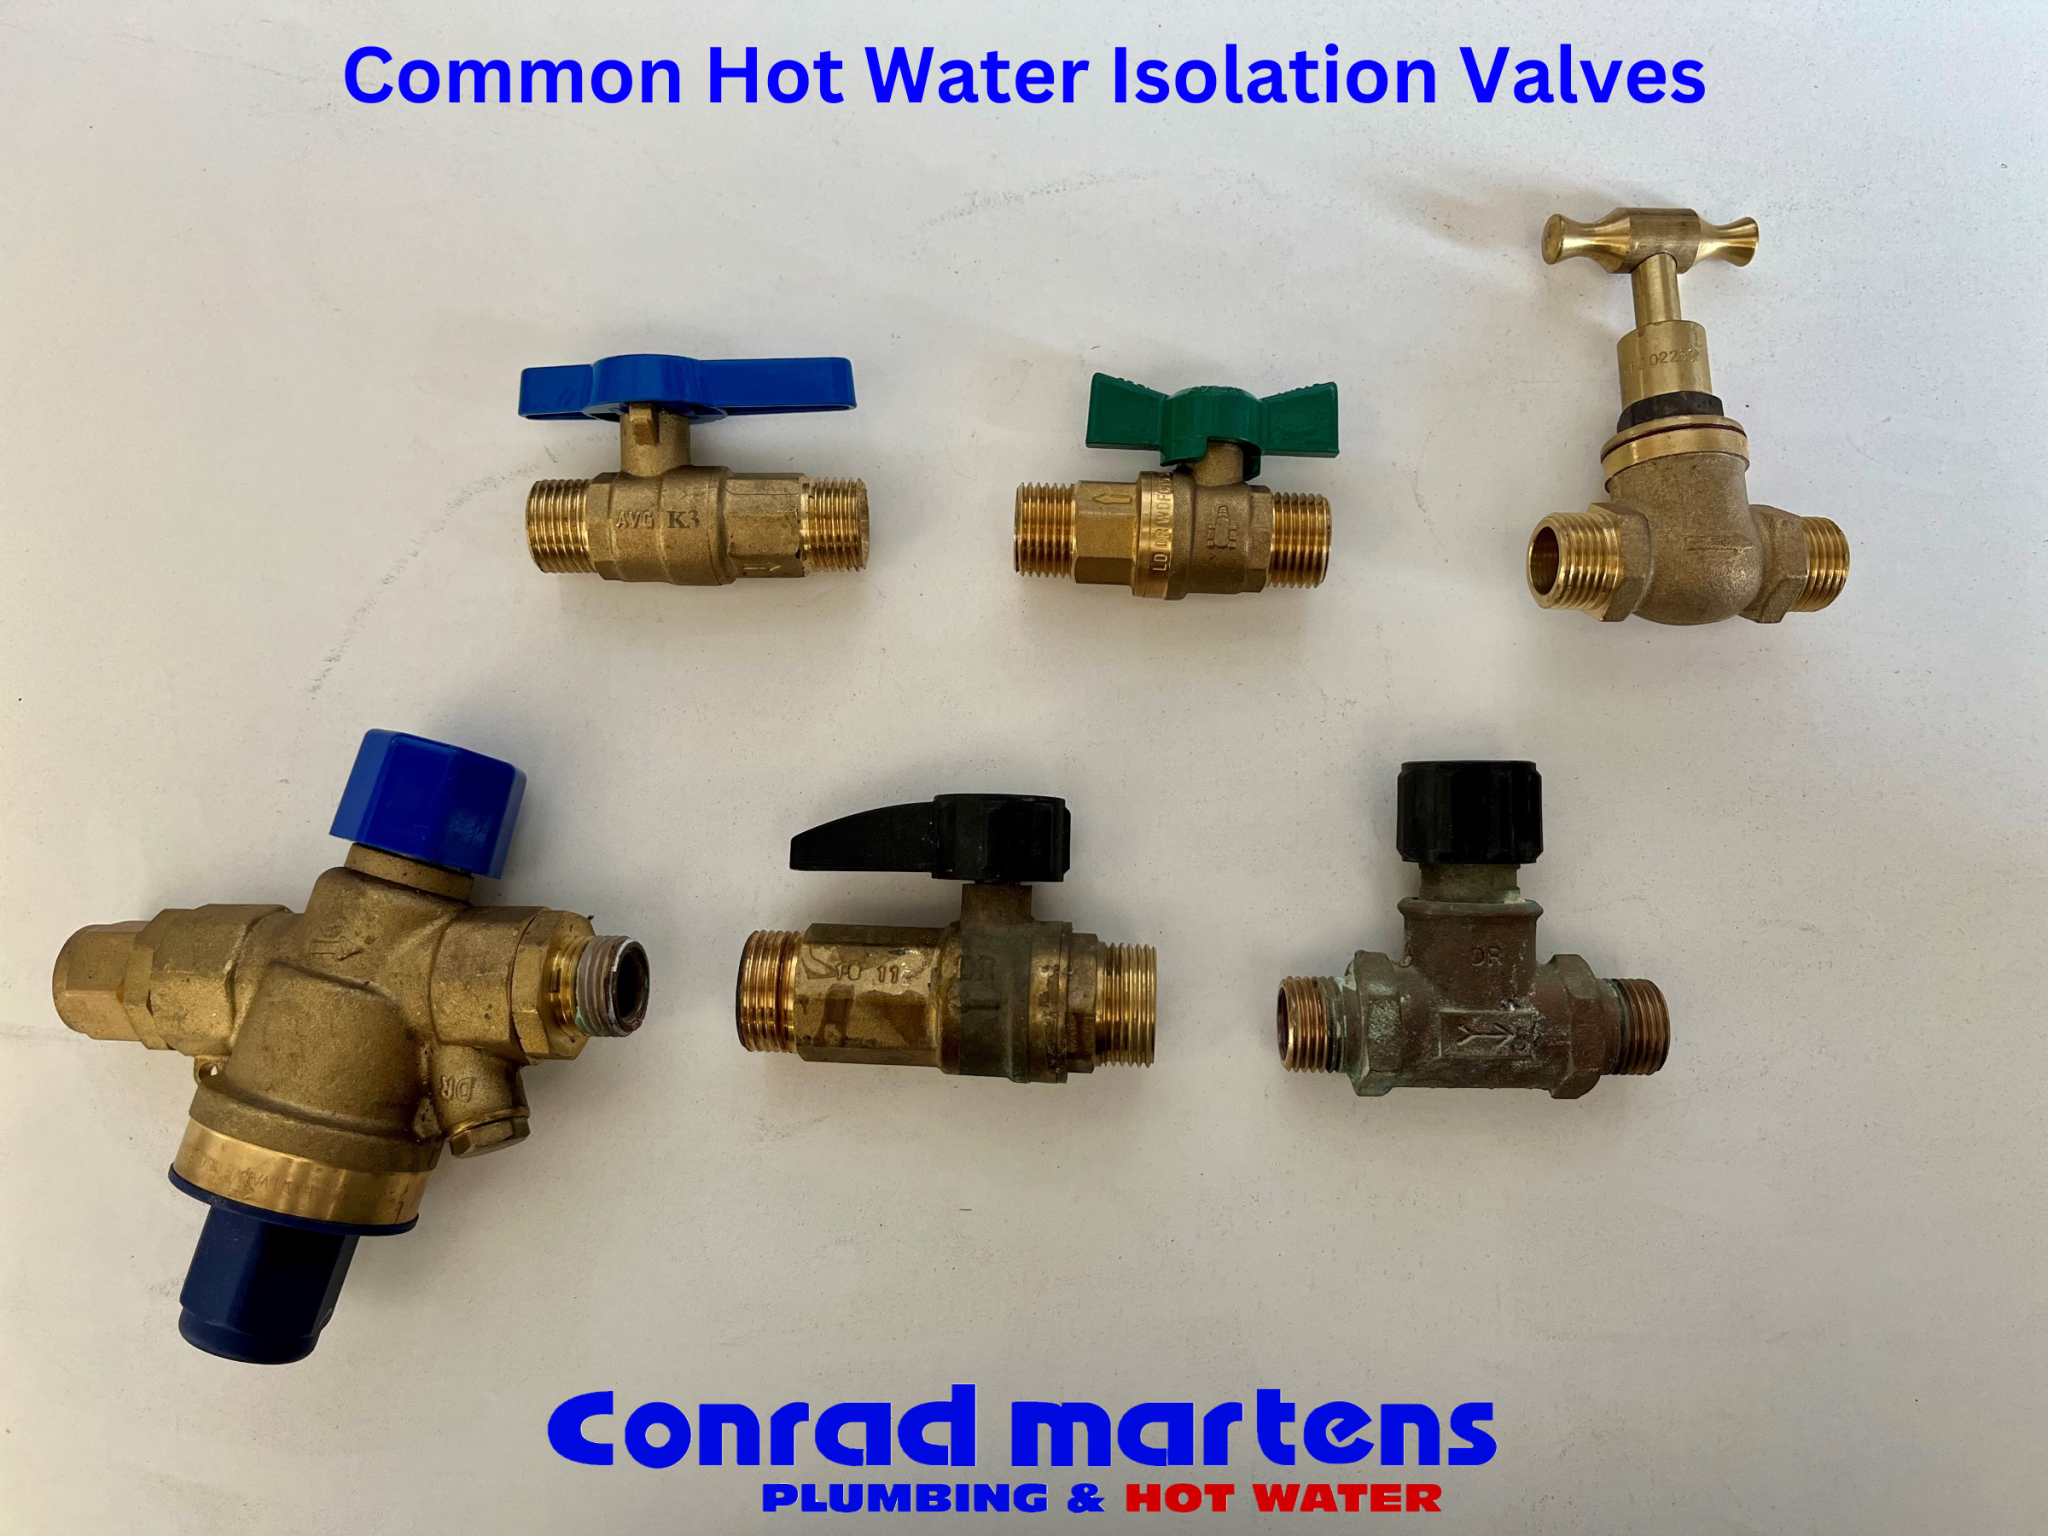 Hot Water isolation Valves